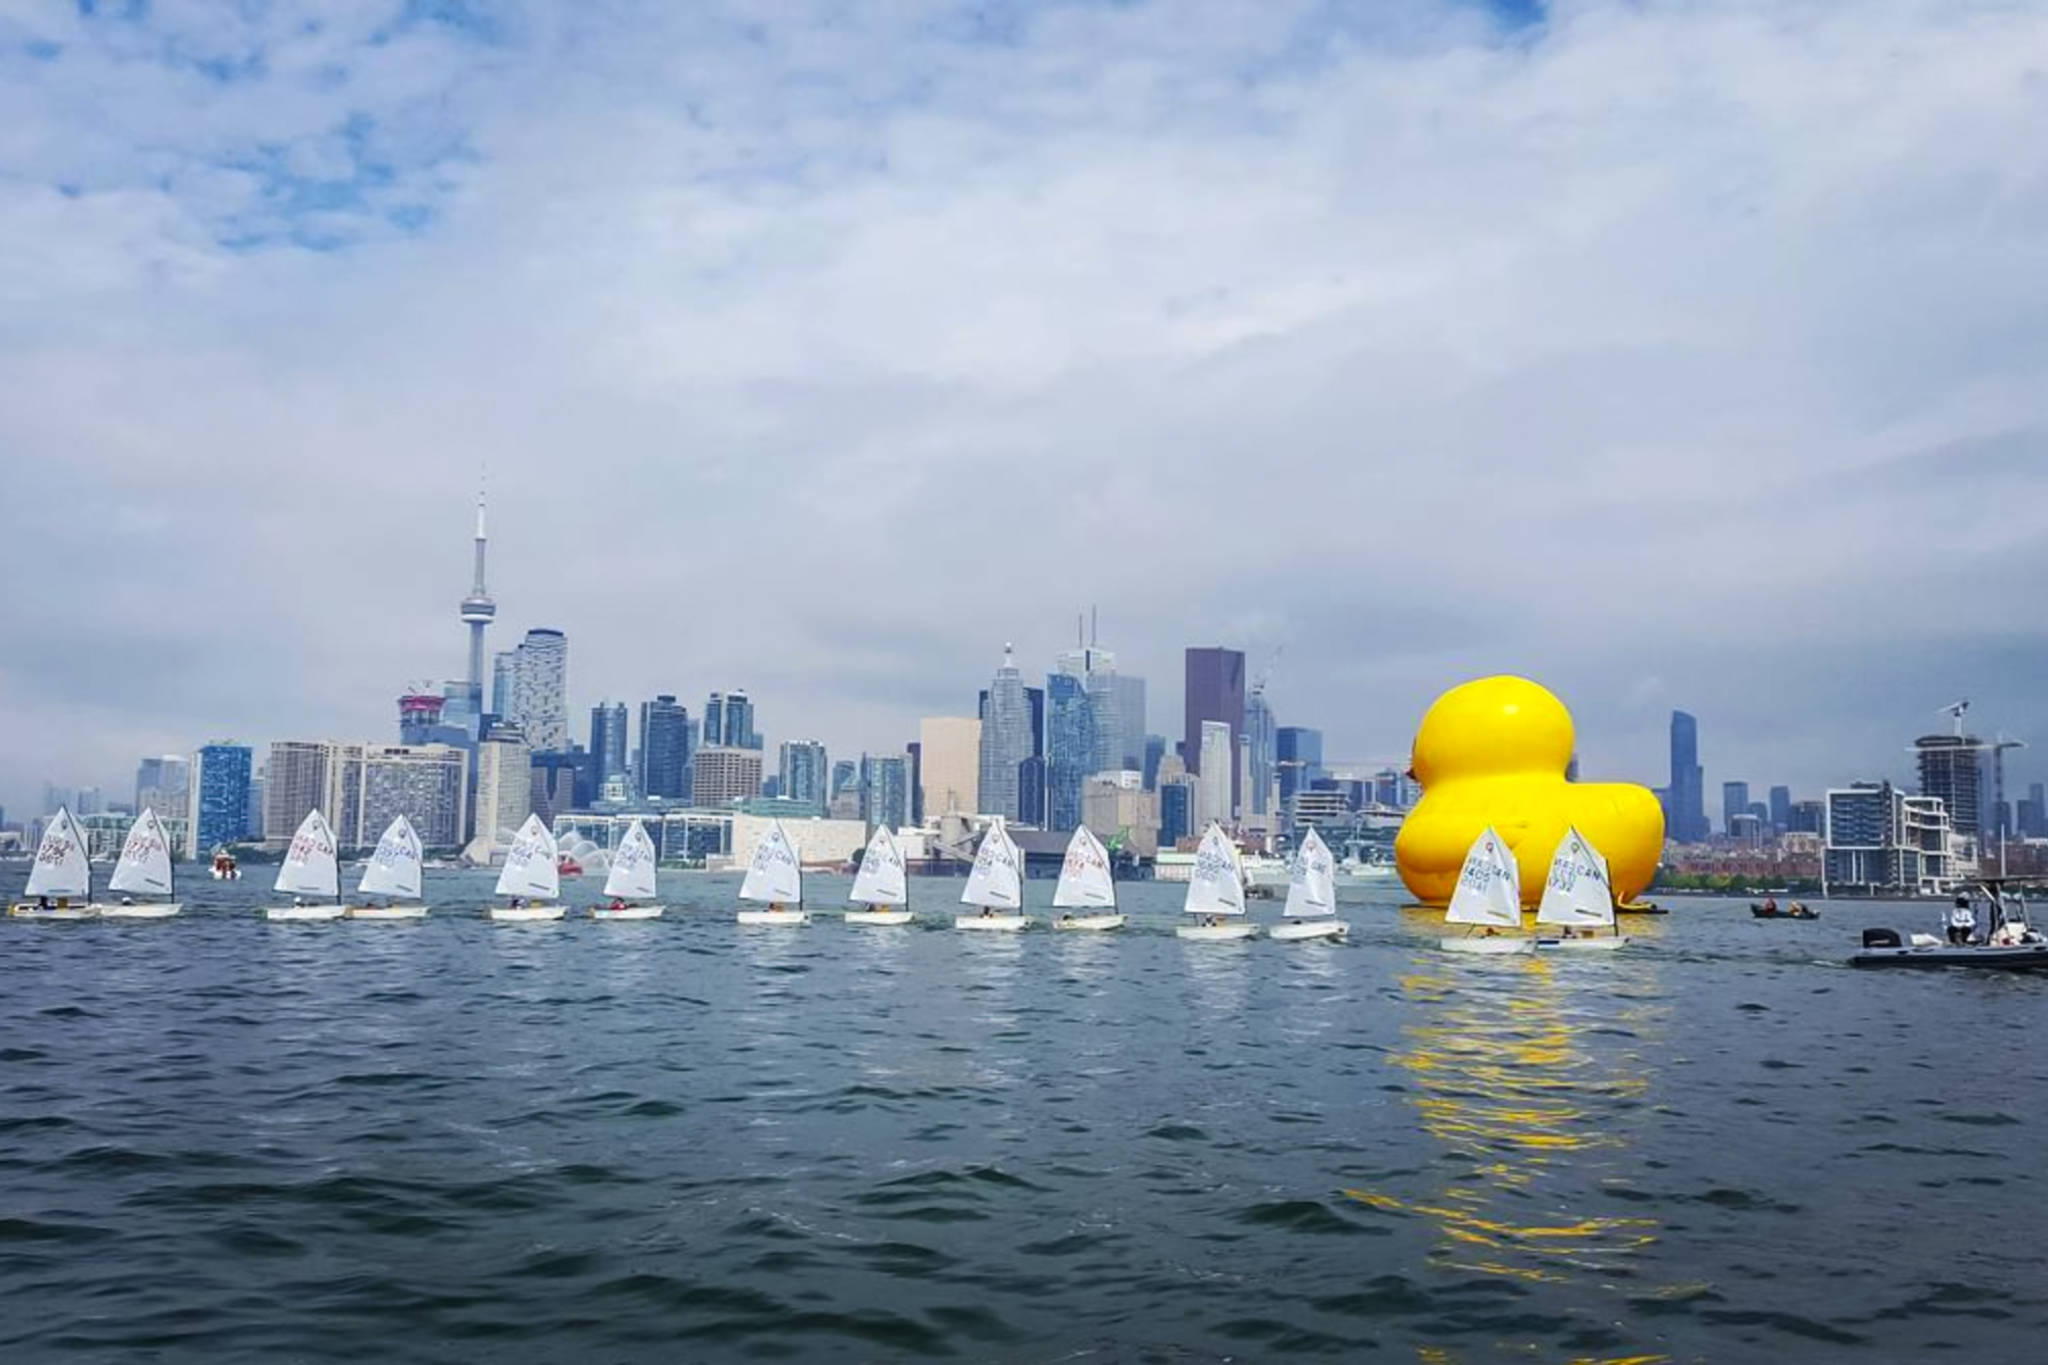 The world's biggest rubber duck just floated into Toronto